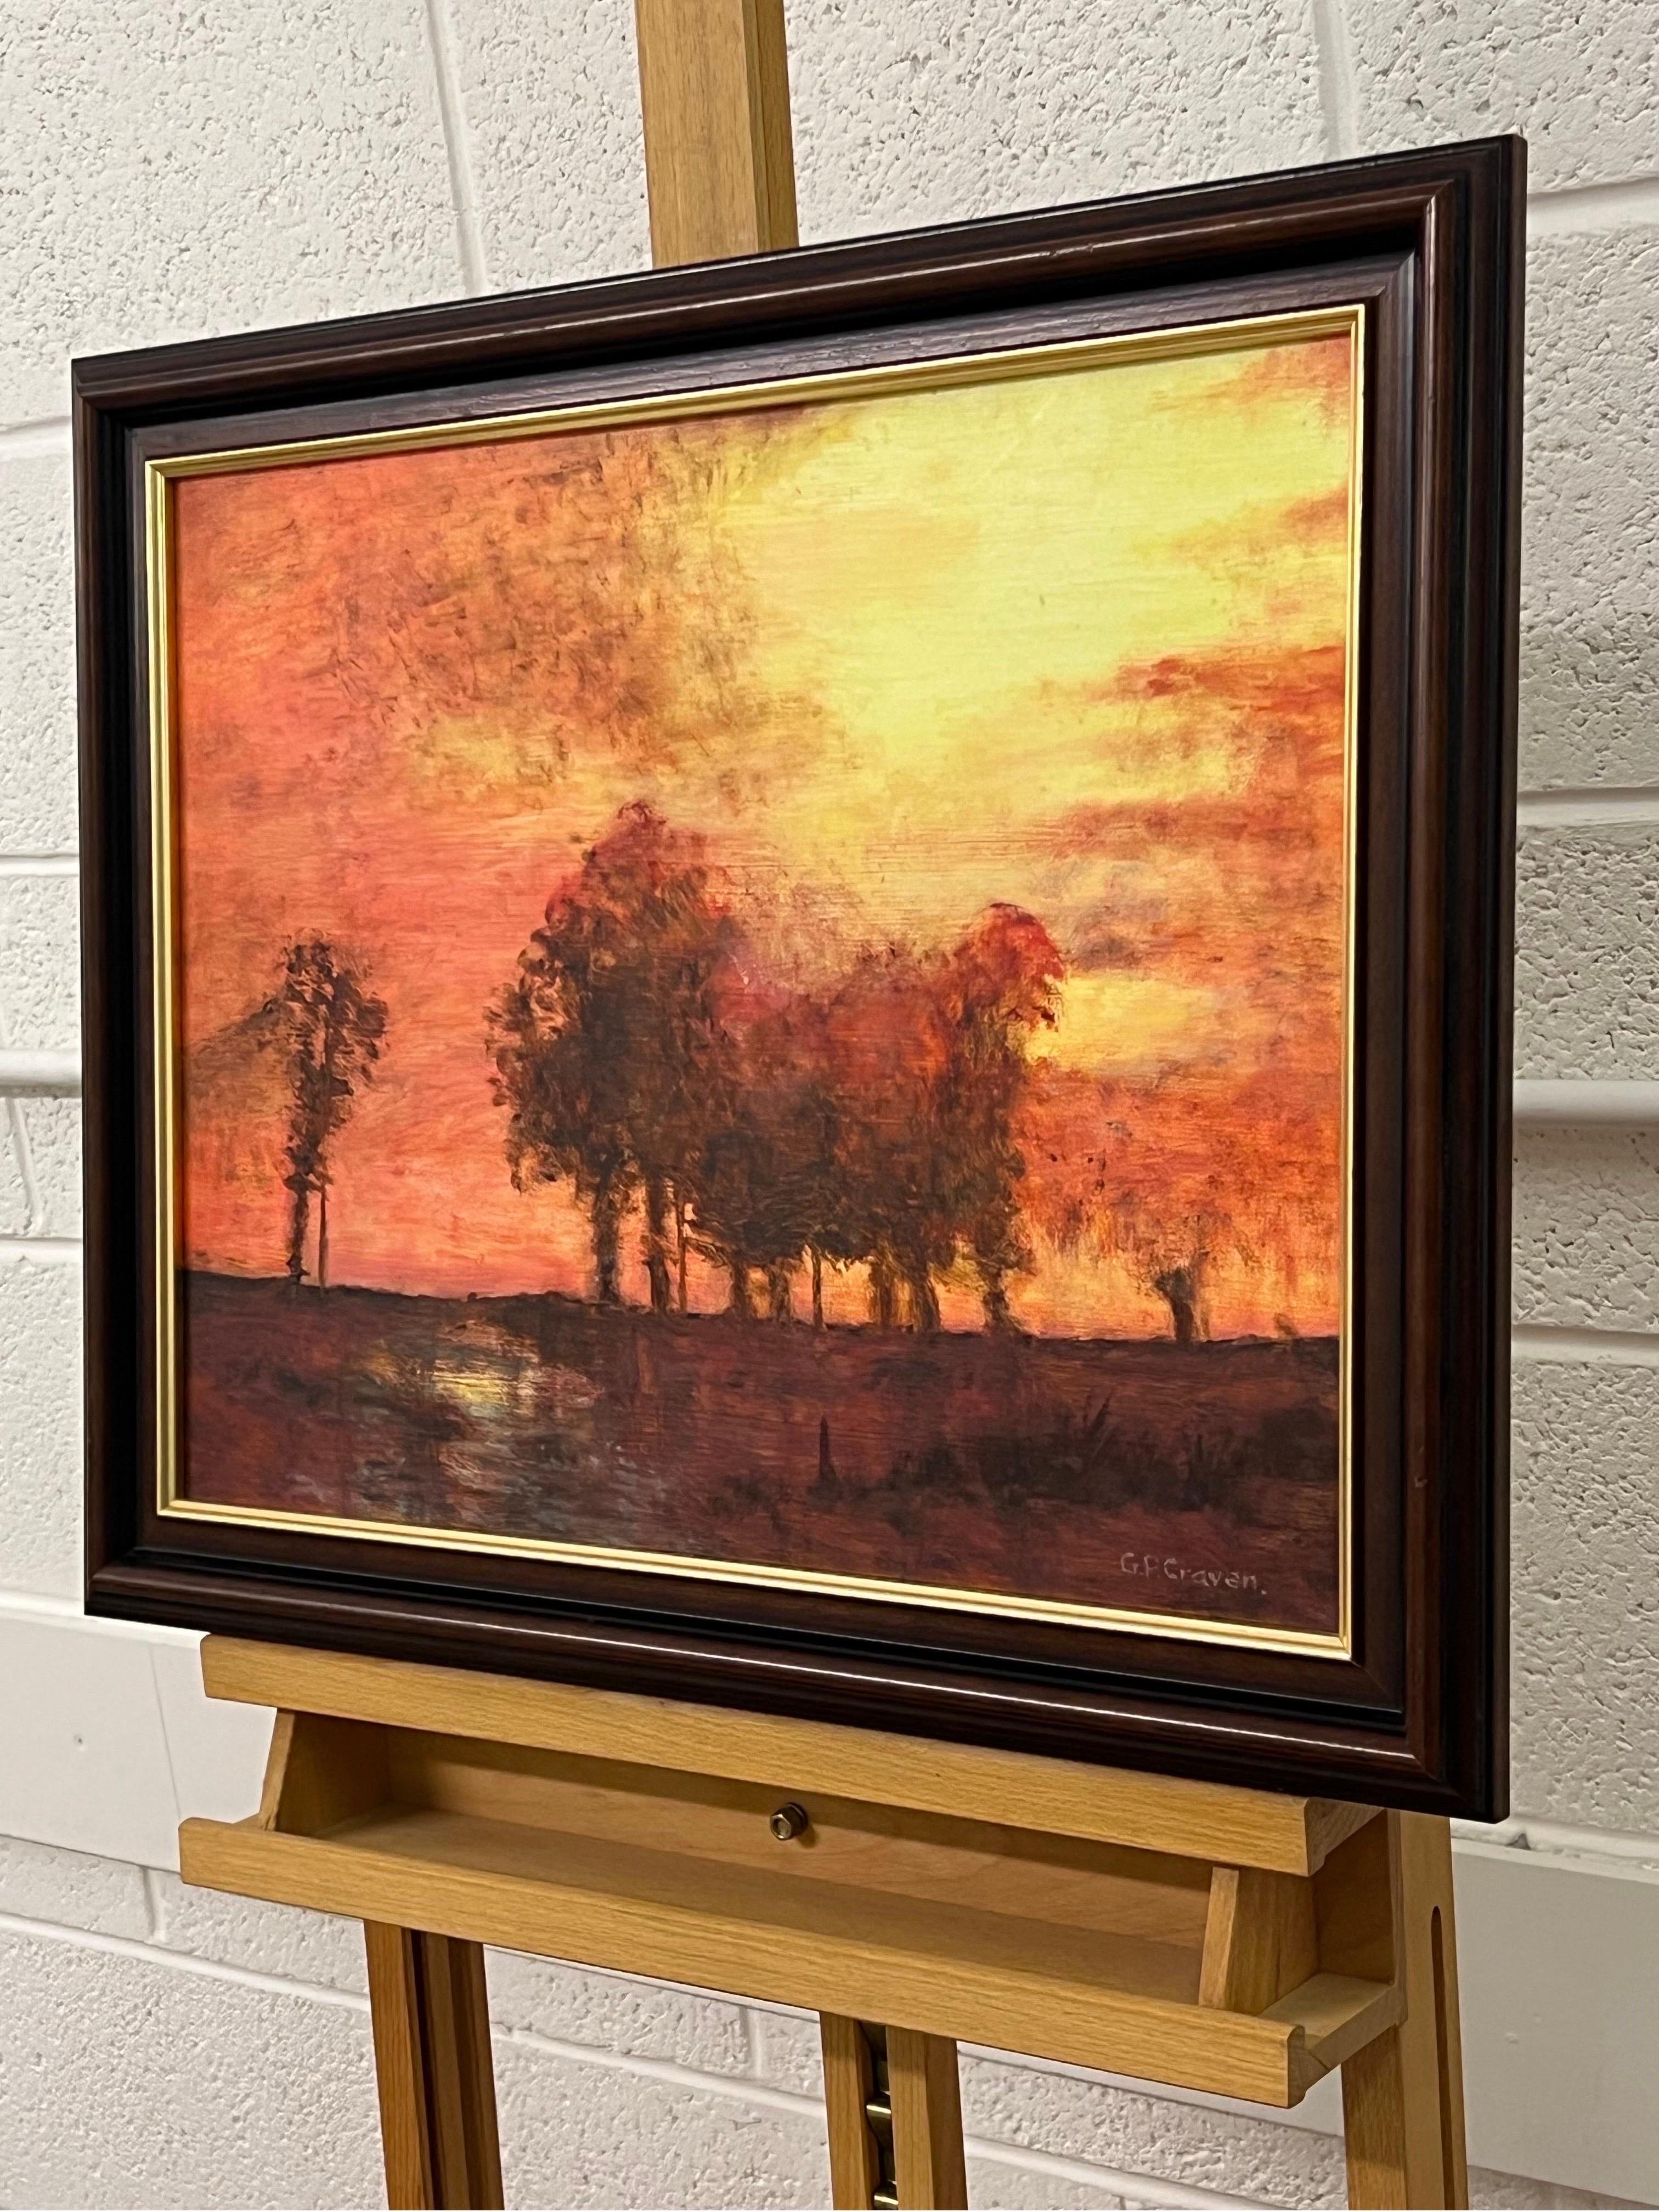 Tree Landscape Sunset with Oranges & Yellows by British Artist For Sale 1